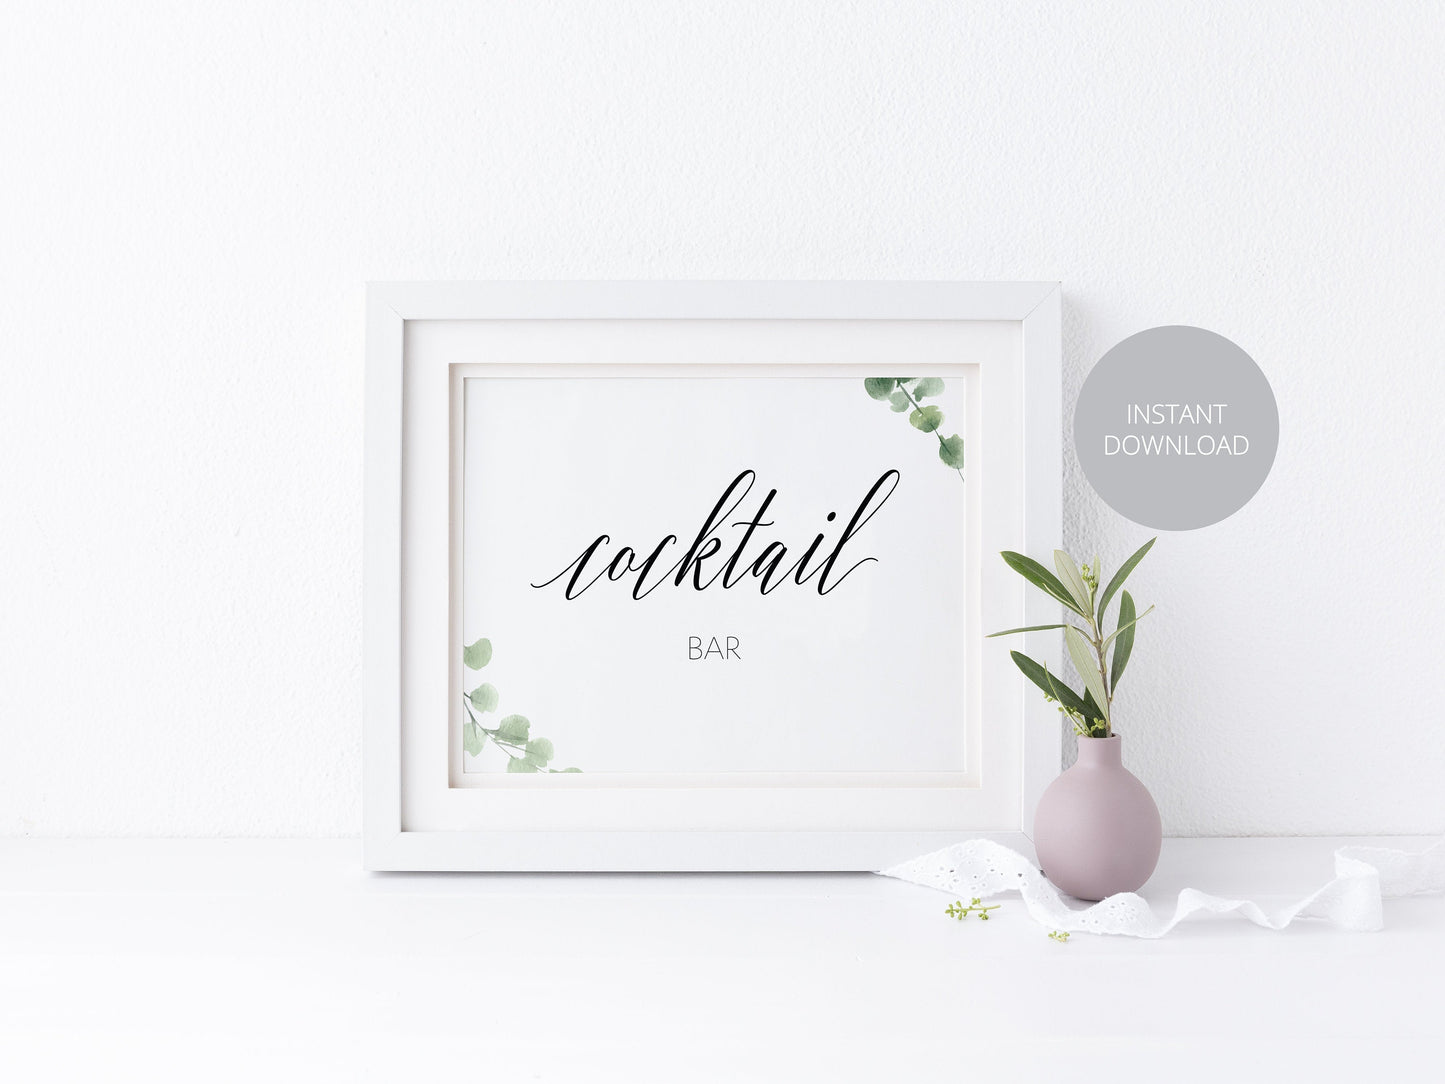 Cocktail Bar Sign, Wedding Decor, Bridal Shower Sign, Wedding sign, Printable Sign, Instant Download, Wedding Signage, Reception Sign SIGNS | PHOTO BOOTH SAVVY PAPER CO